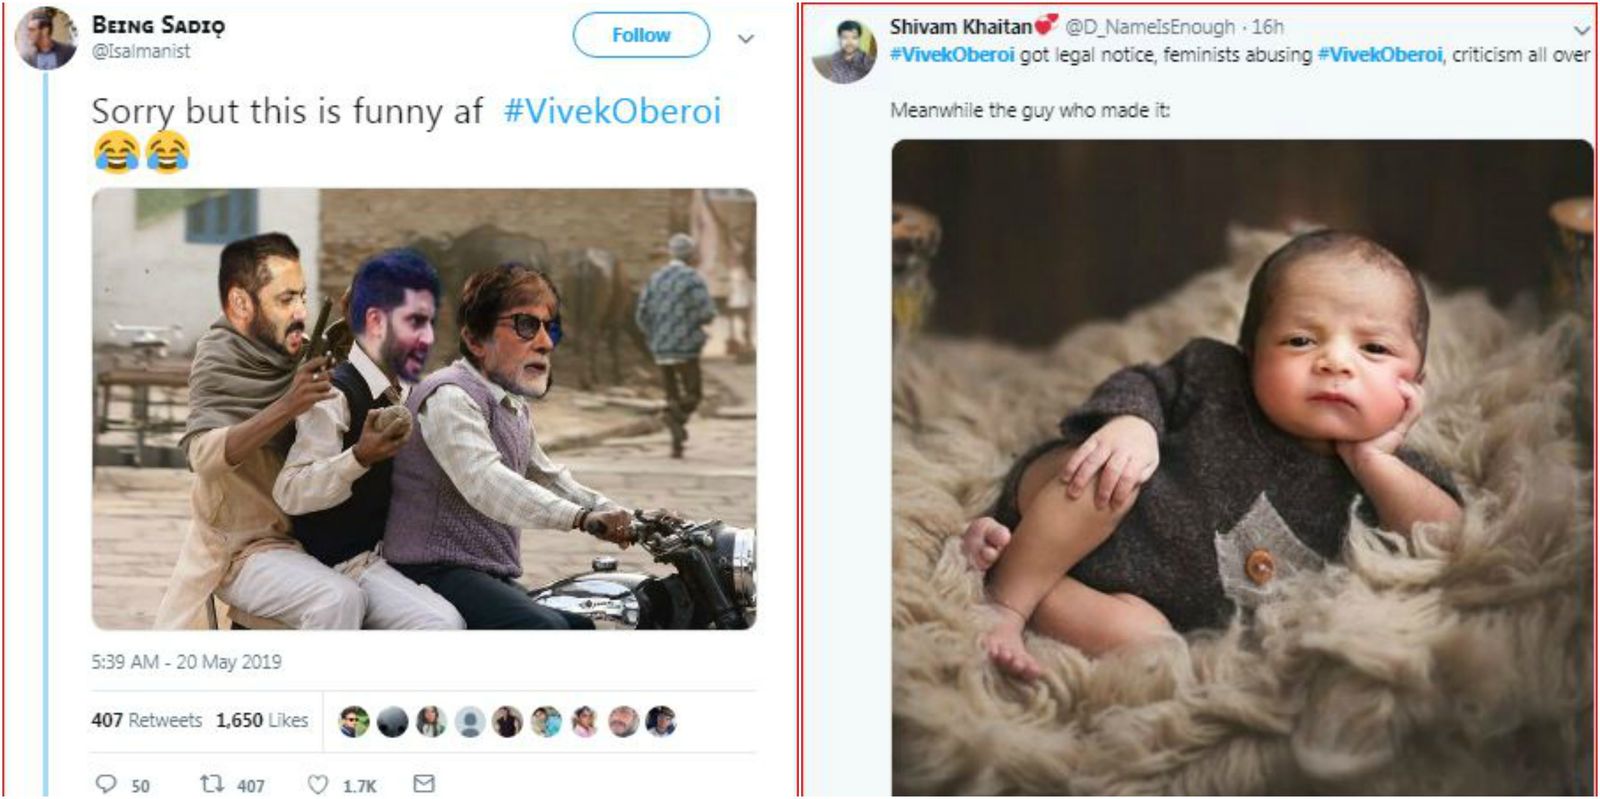 Vivek Oberoi’s Meme On Aishwarya Rai Bachchan Might Not Be Funny, But These Memes On The Controversy Are Definitely Hilarious